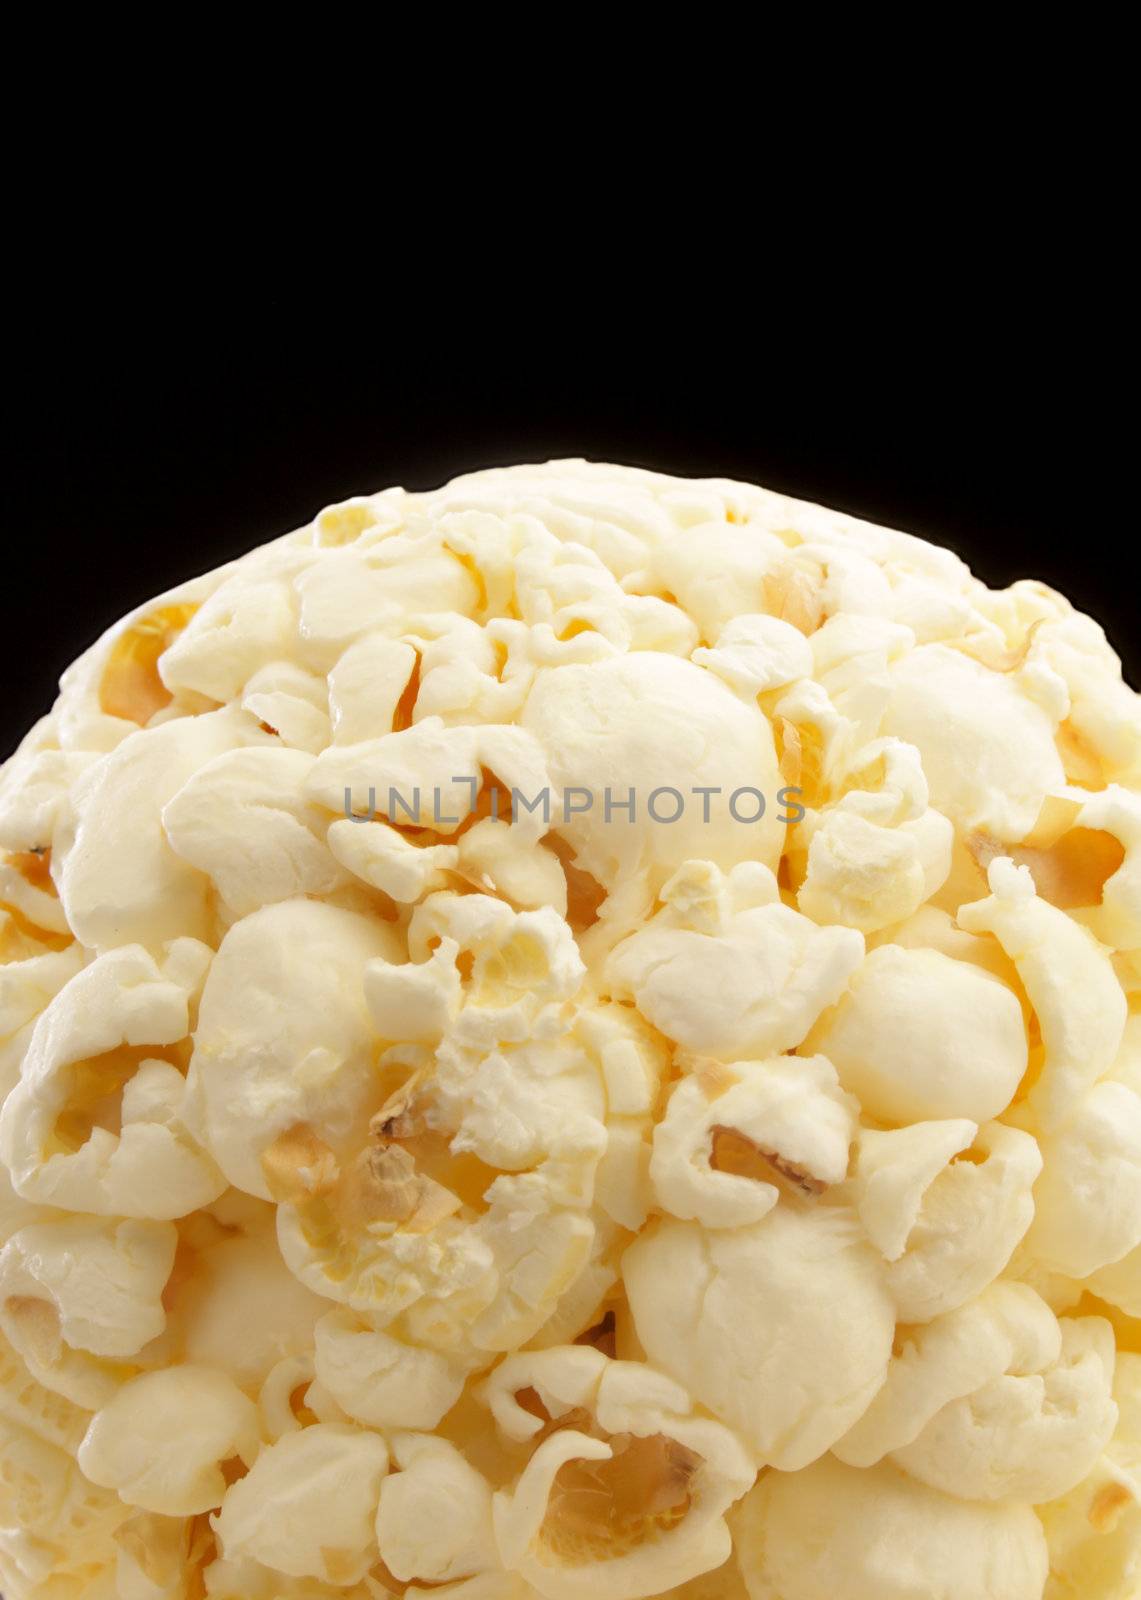 Closeup view of popcorn ball isolated on black with copy space.